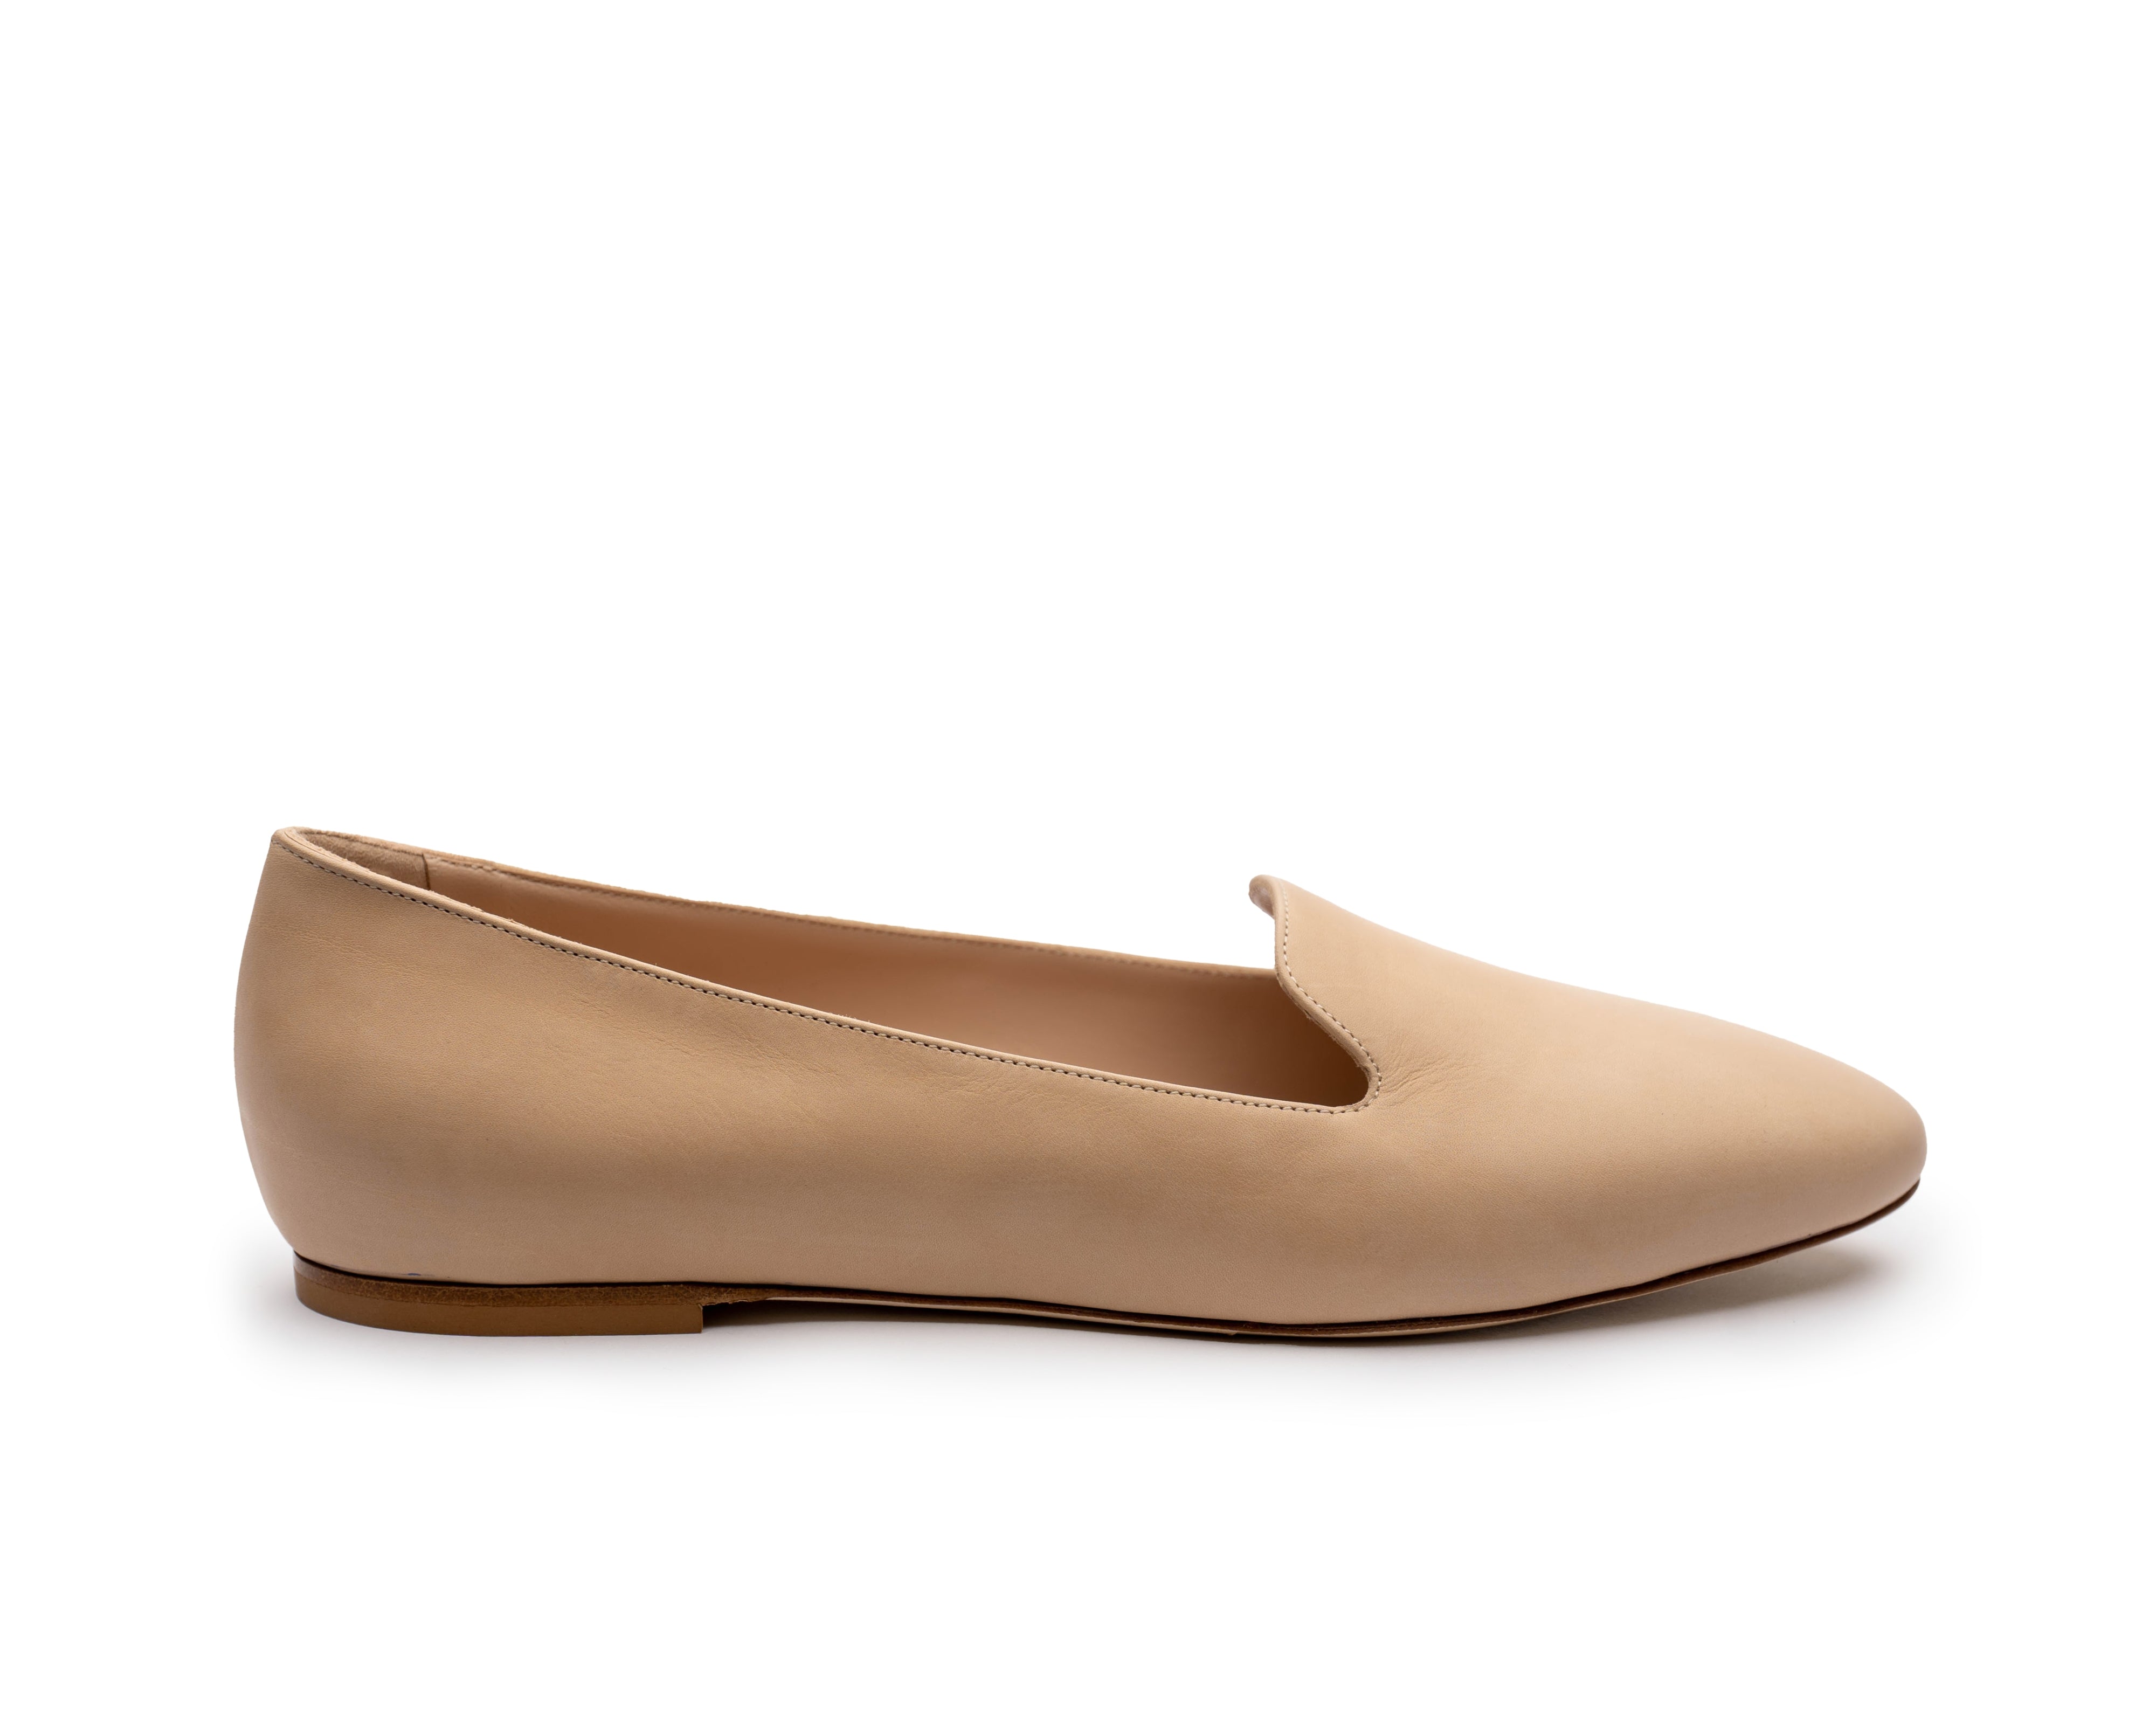 Nude loafers. Tan White loafers. True to skin. Office Professional loafers. Women's Loafers.